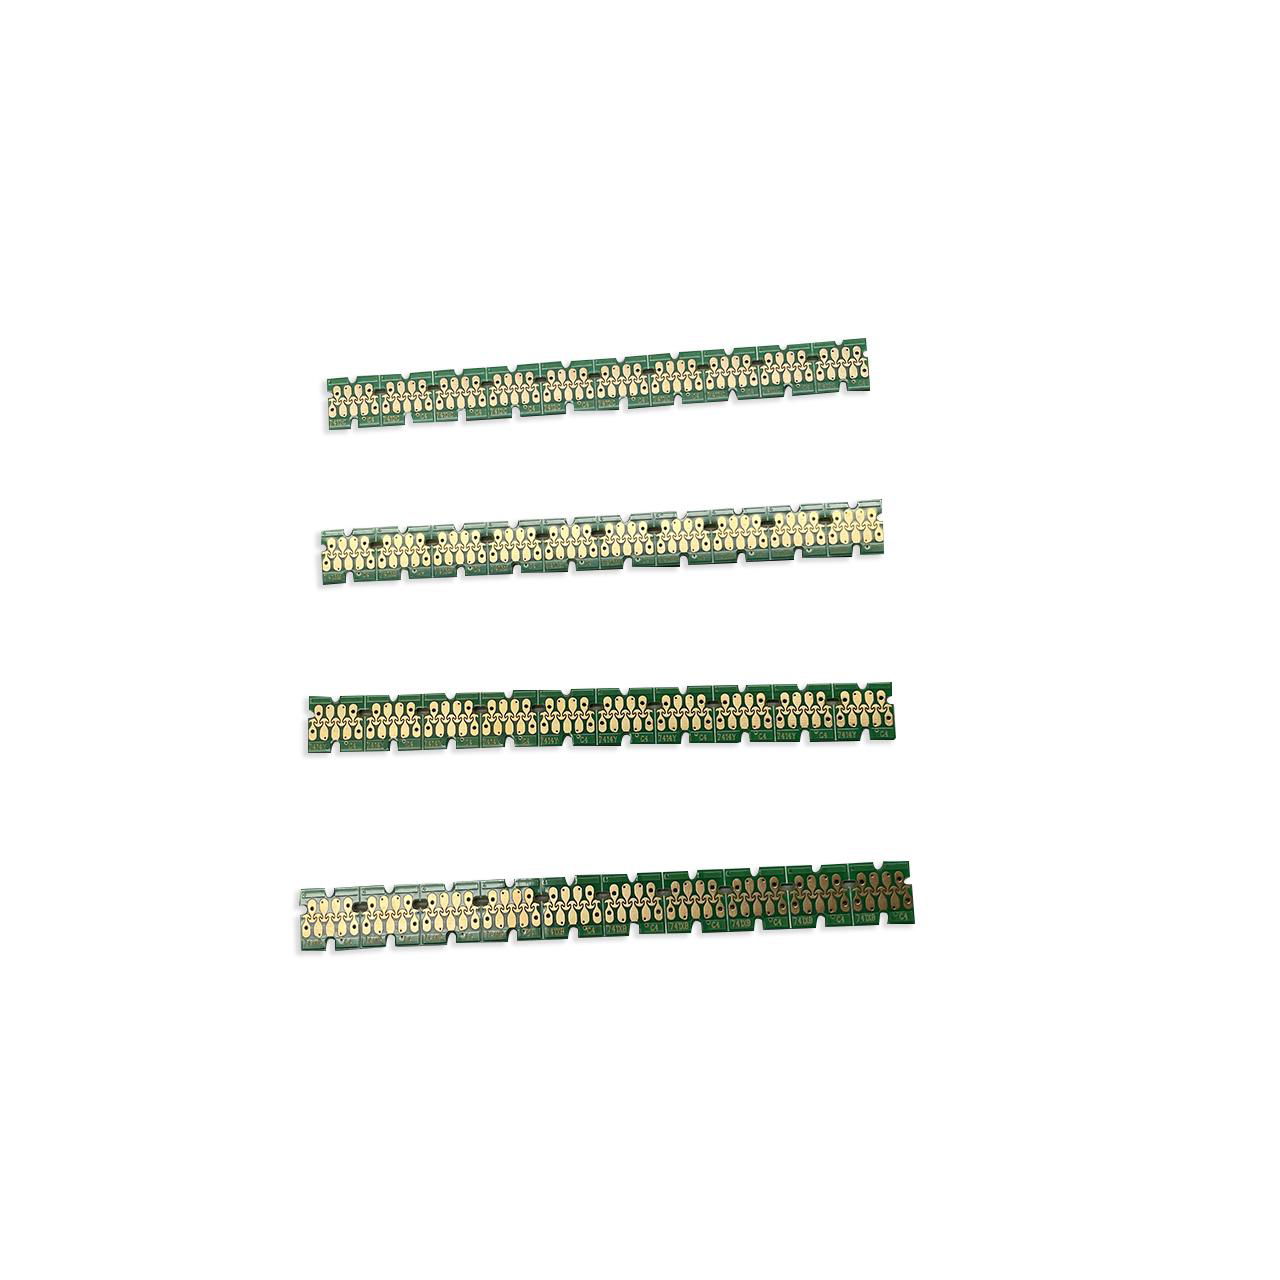 COLORTIME T7731-T7734 Cartridge one time chip for Epson SureColor SC B7000 B6000 2